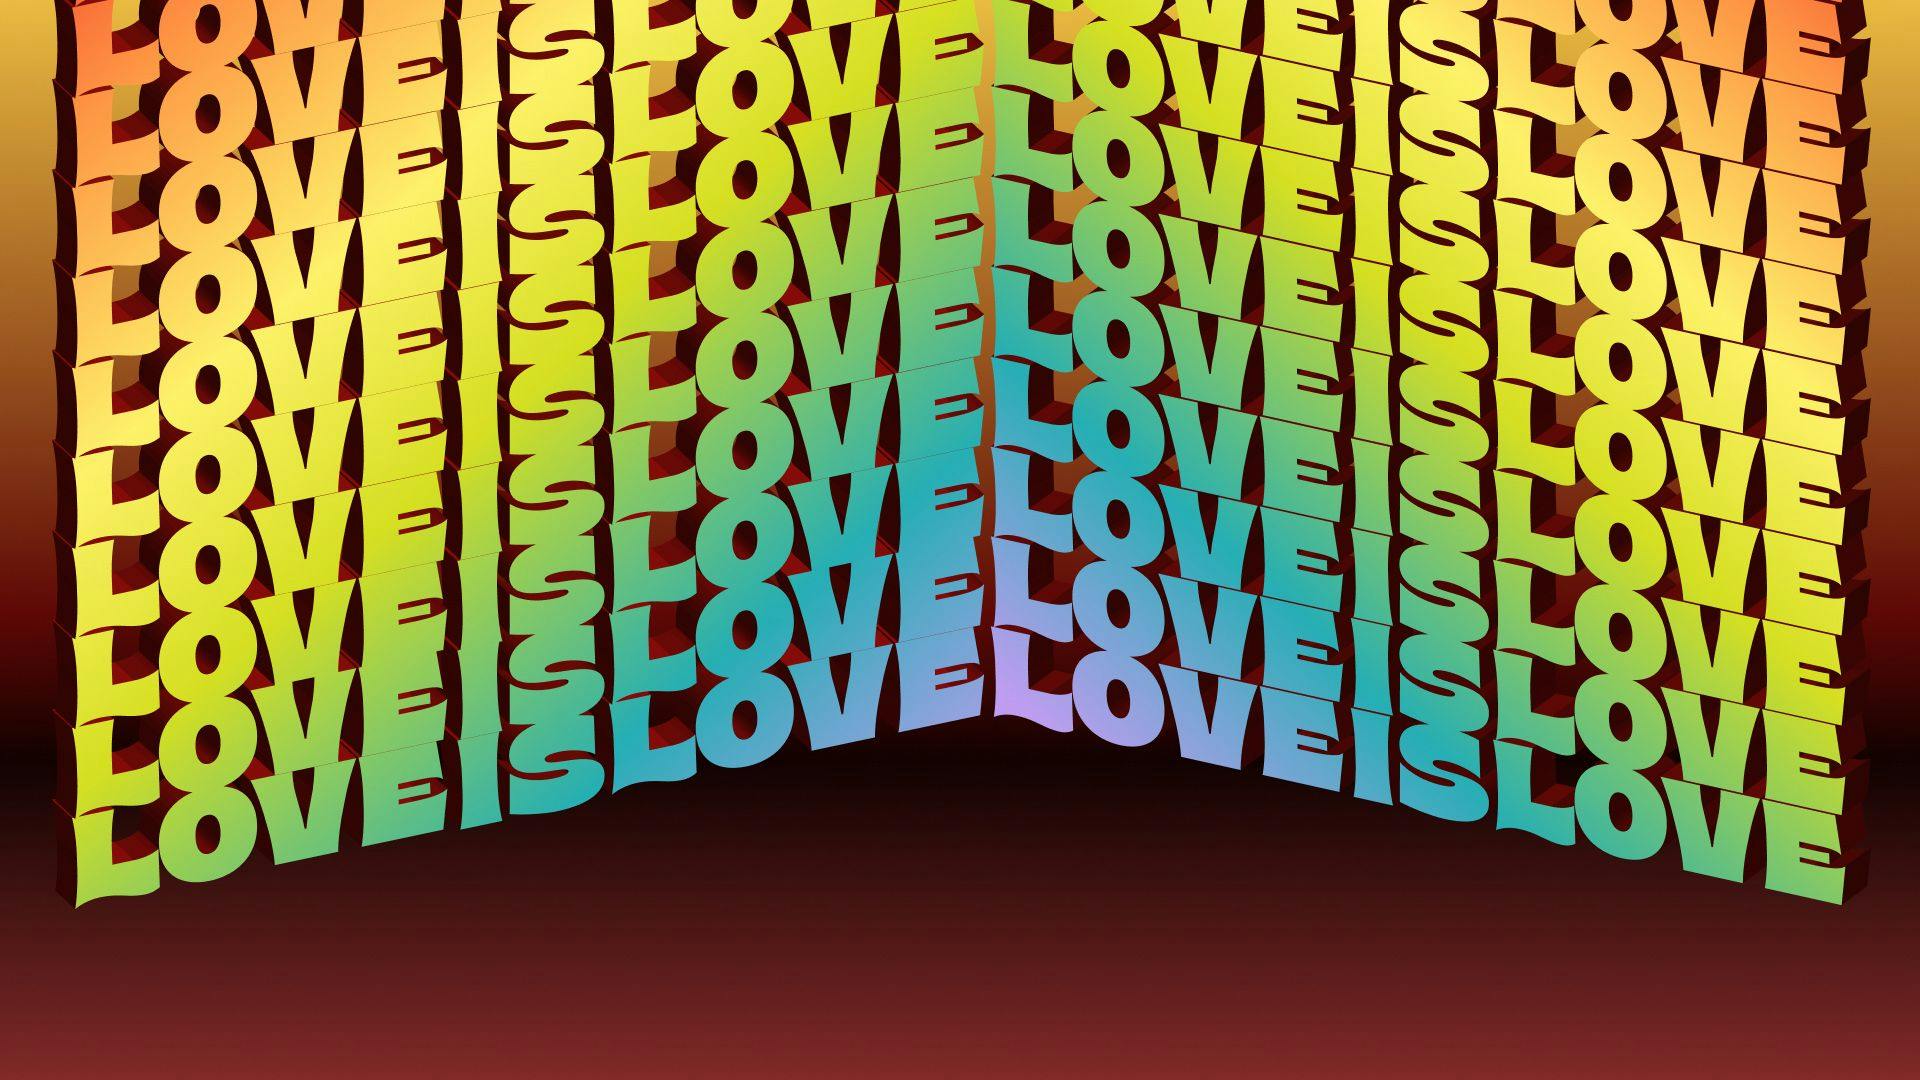 Illustration that says Love is Love in rainbow colors